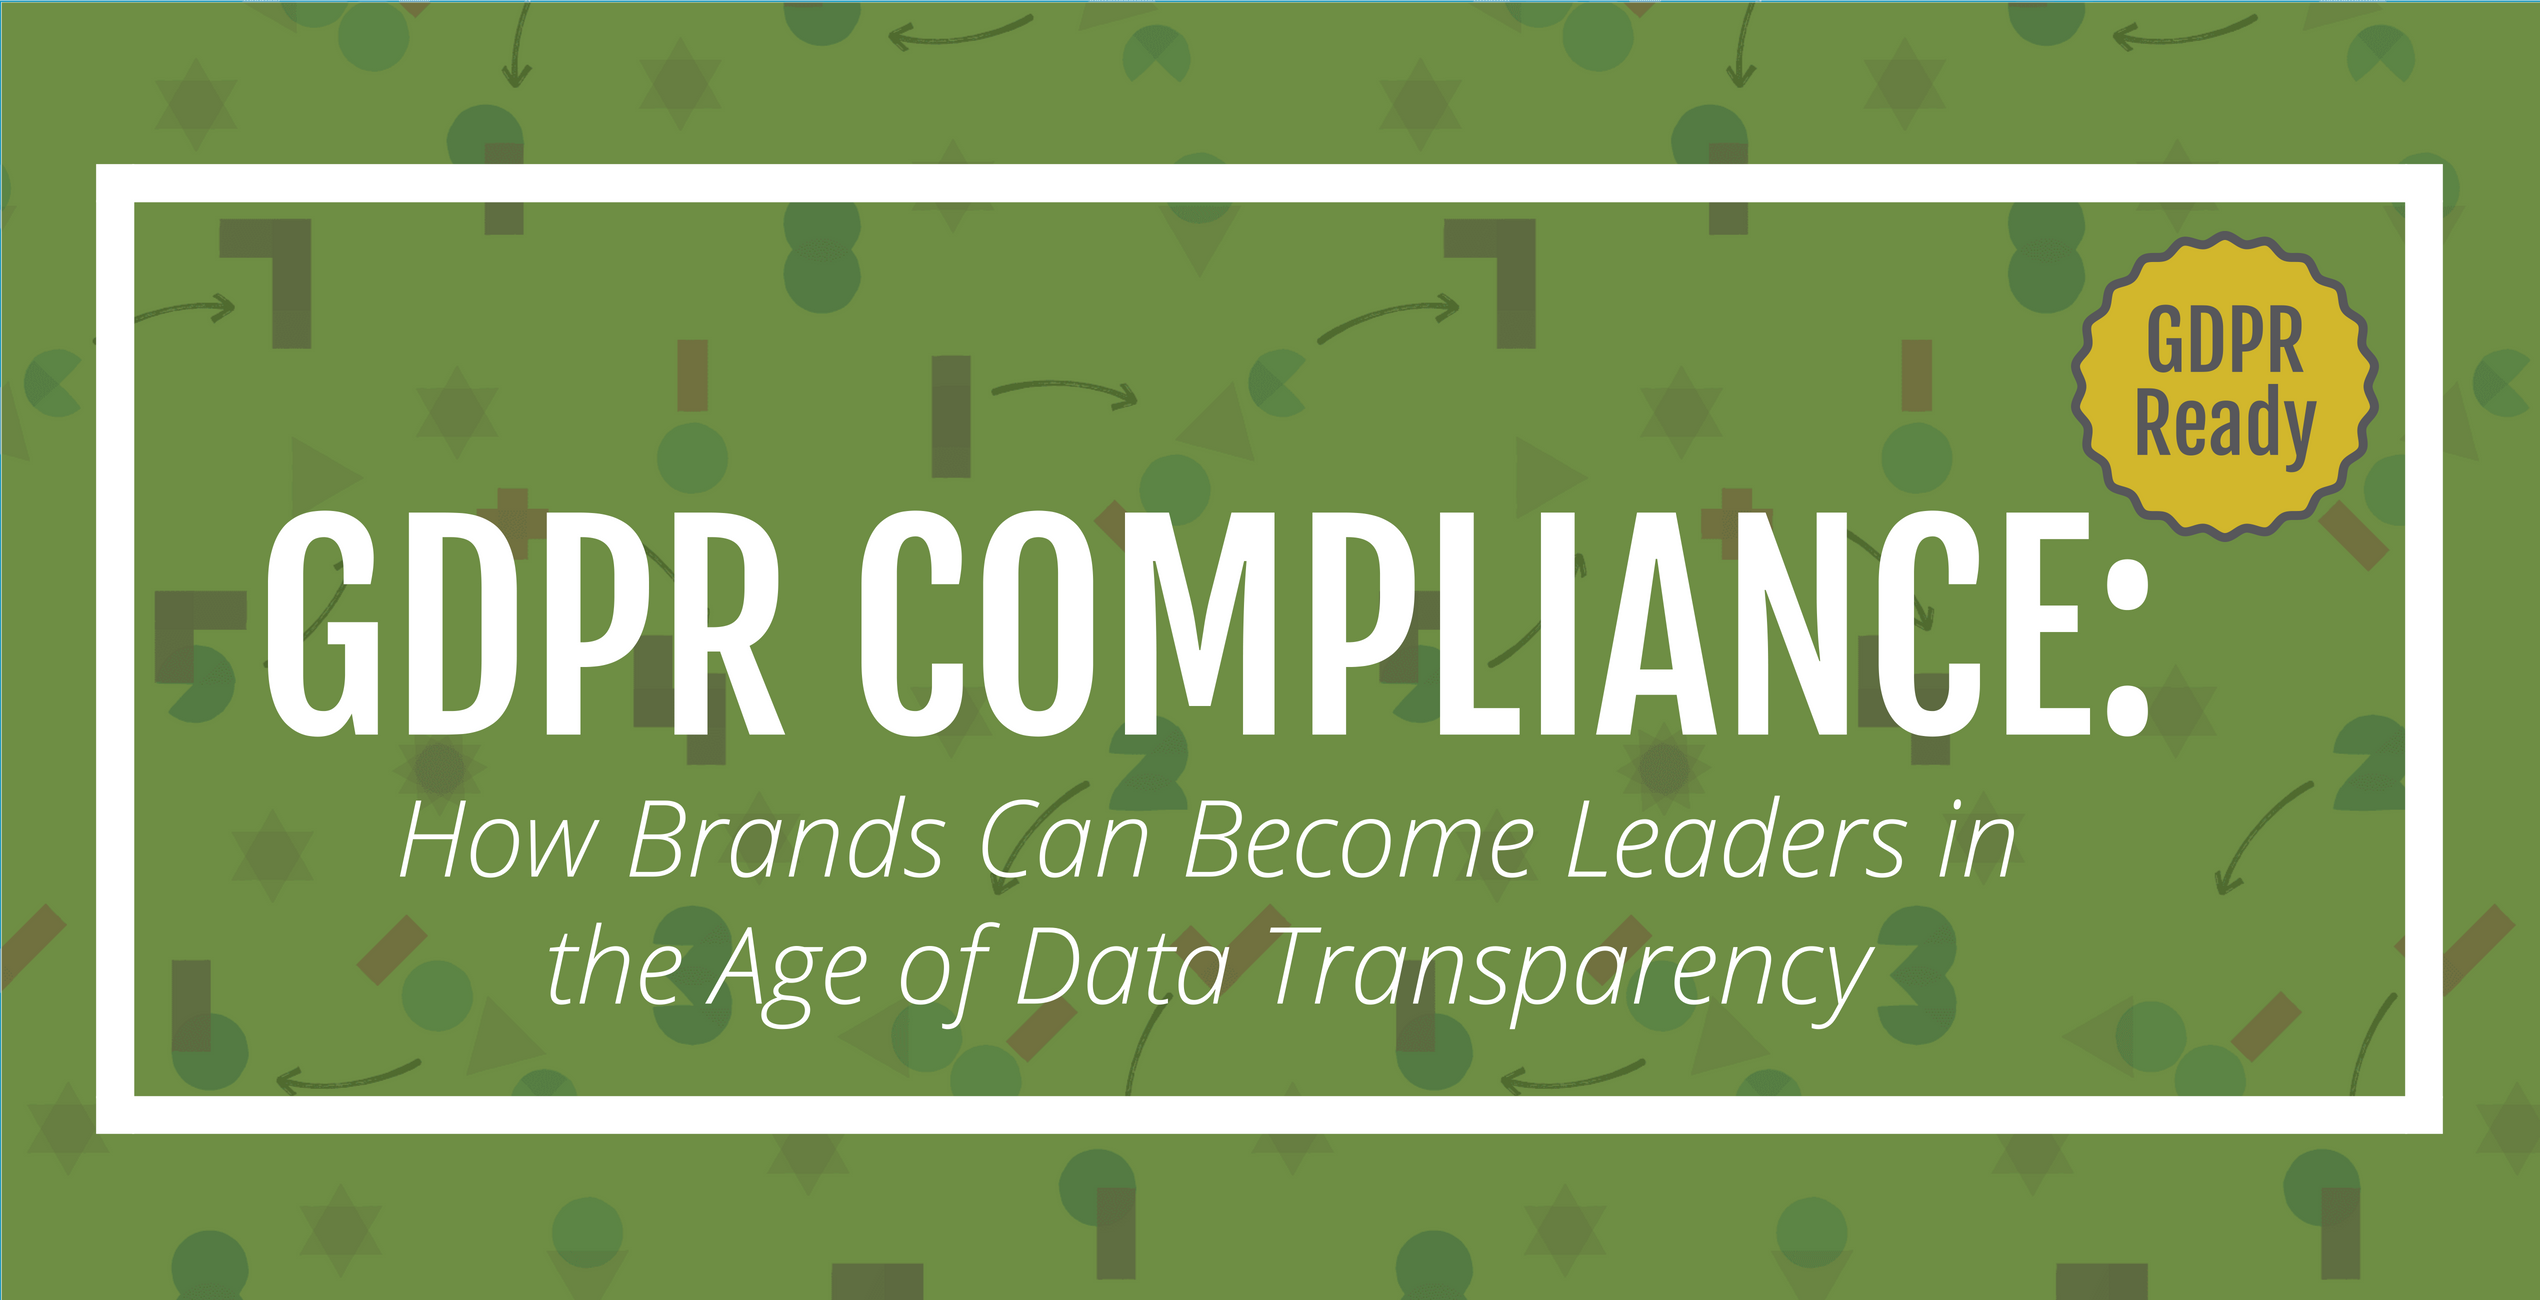 GDPR Compliance: How Brands Can Become Leaders in the Age of Data Transparency